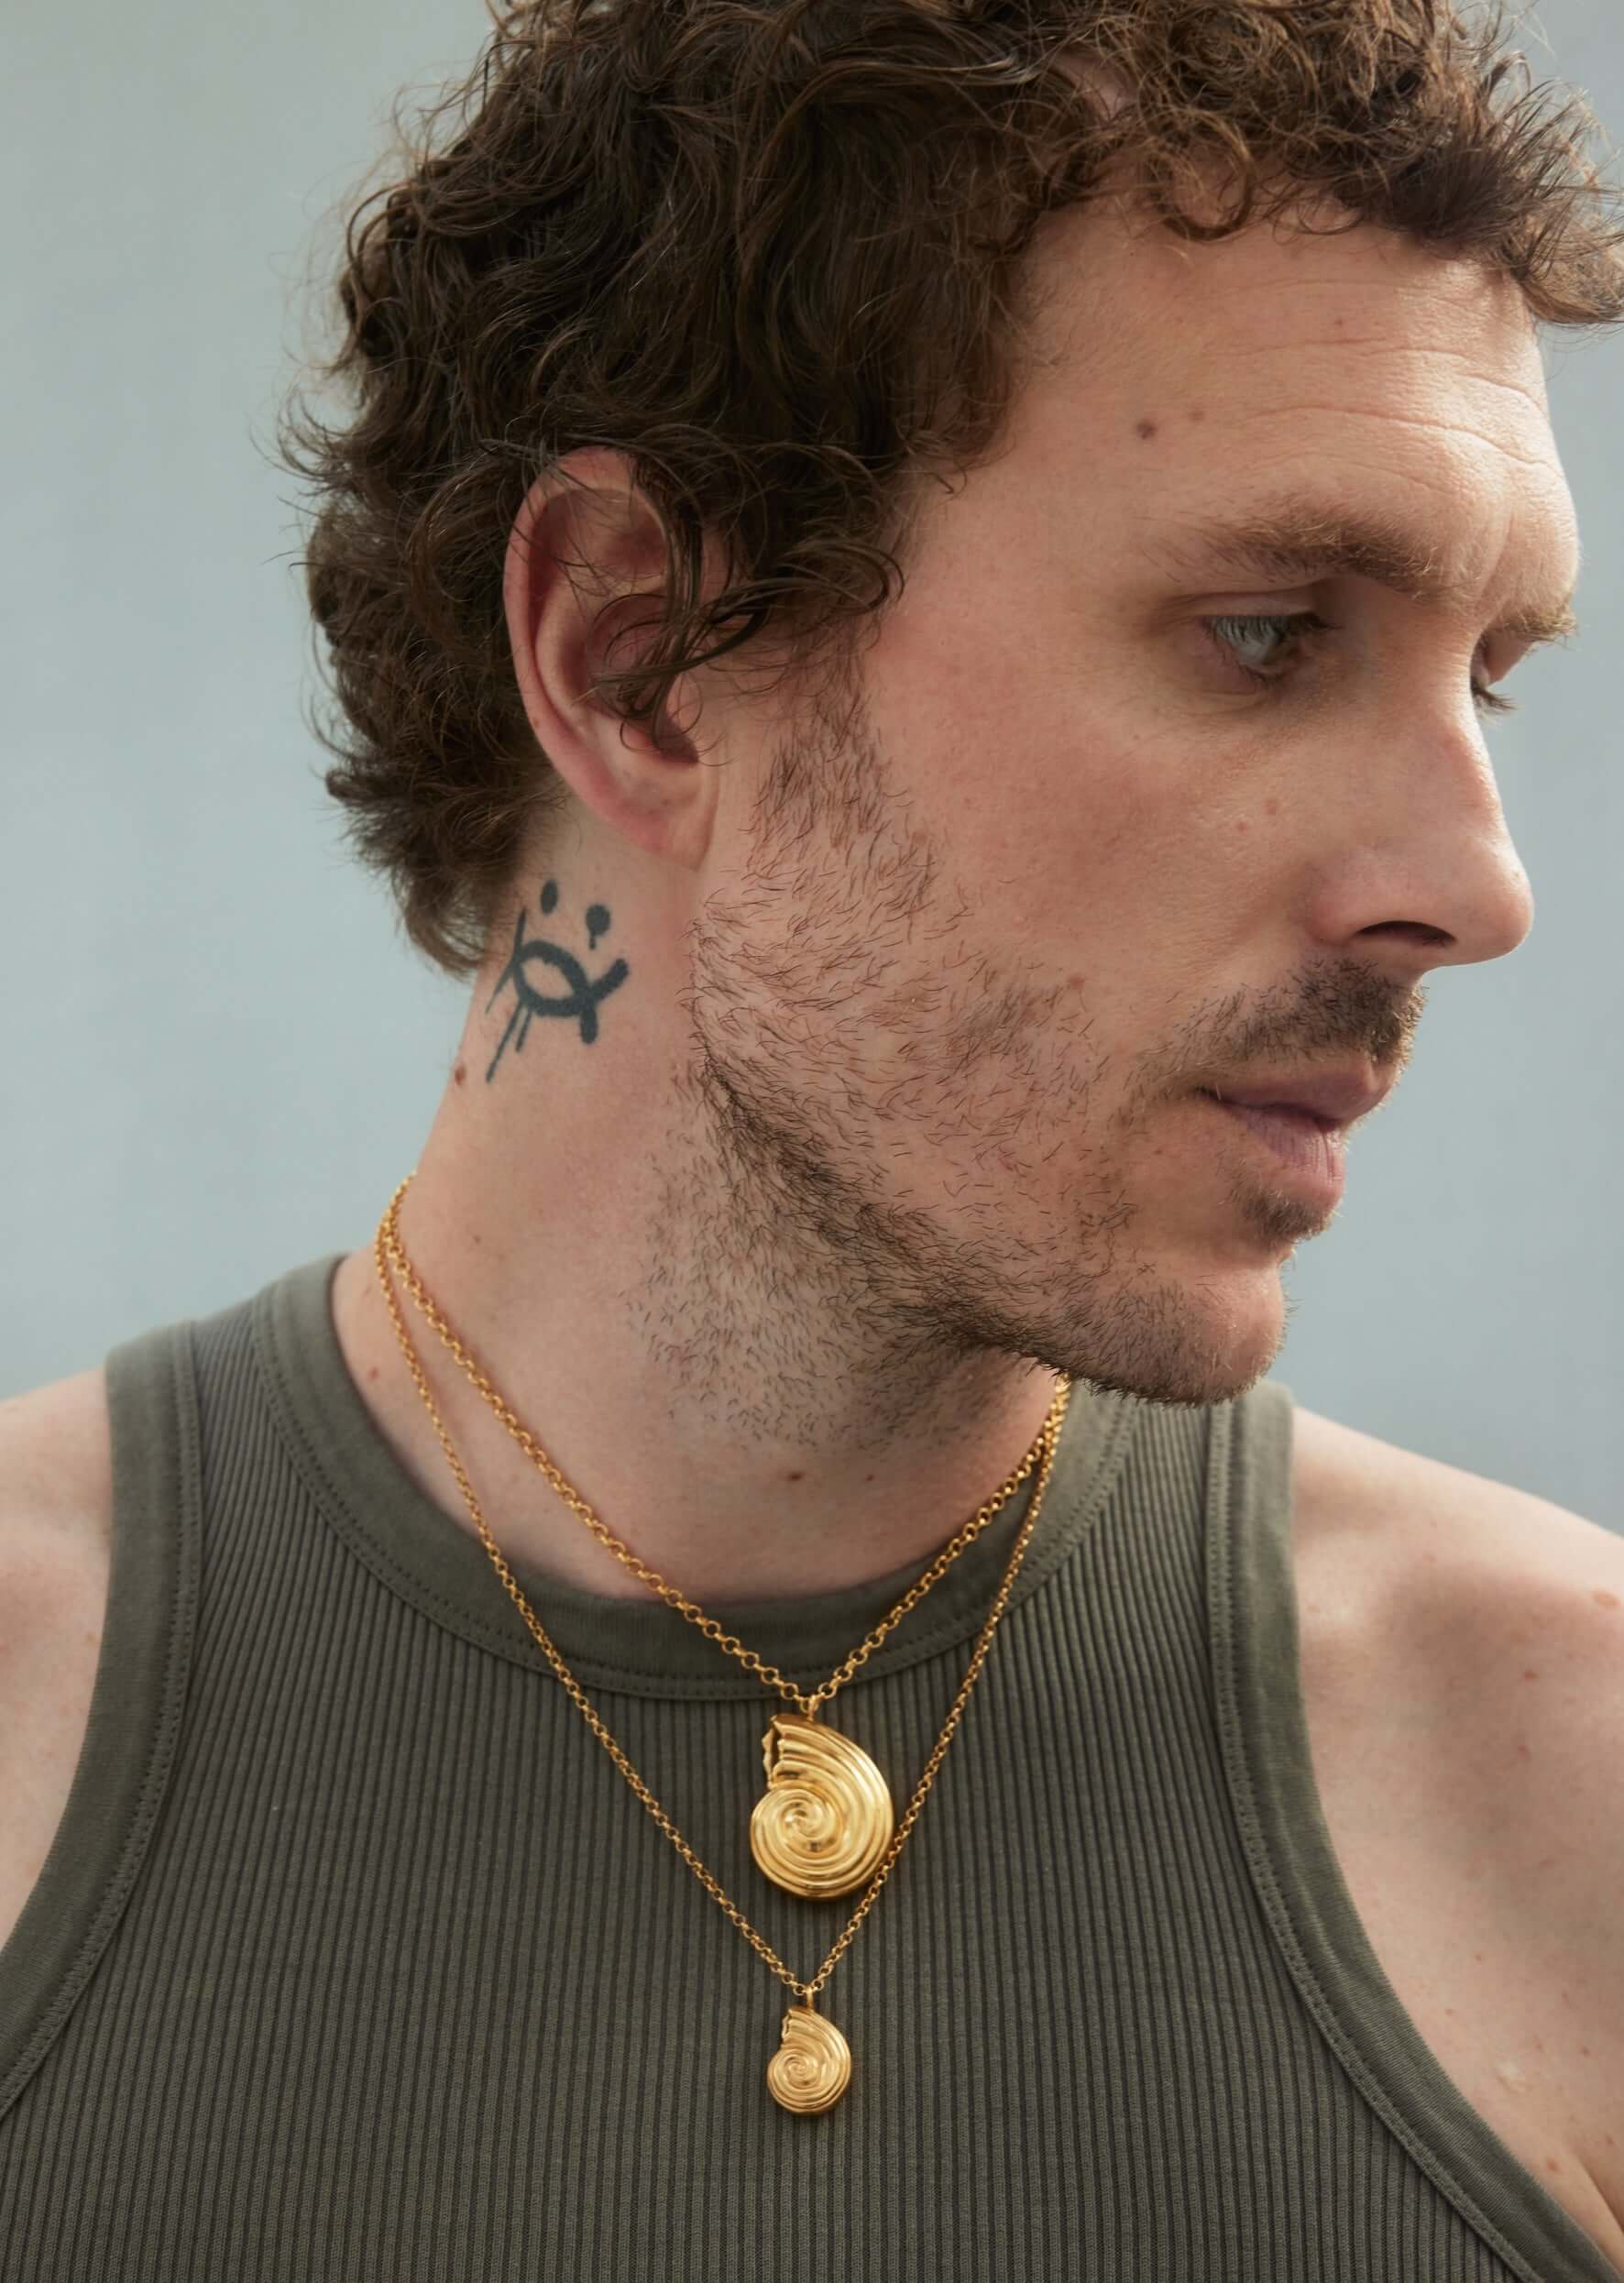 Male model with tattoo wearing gold necklaces